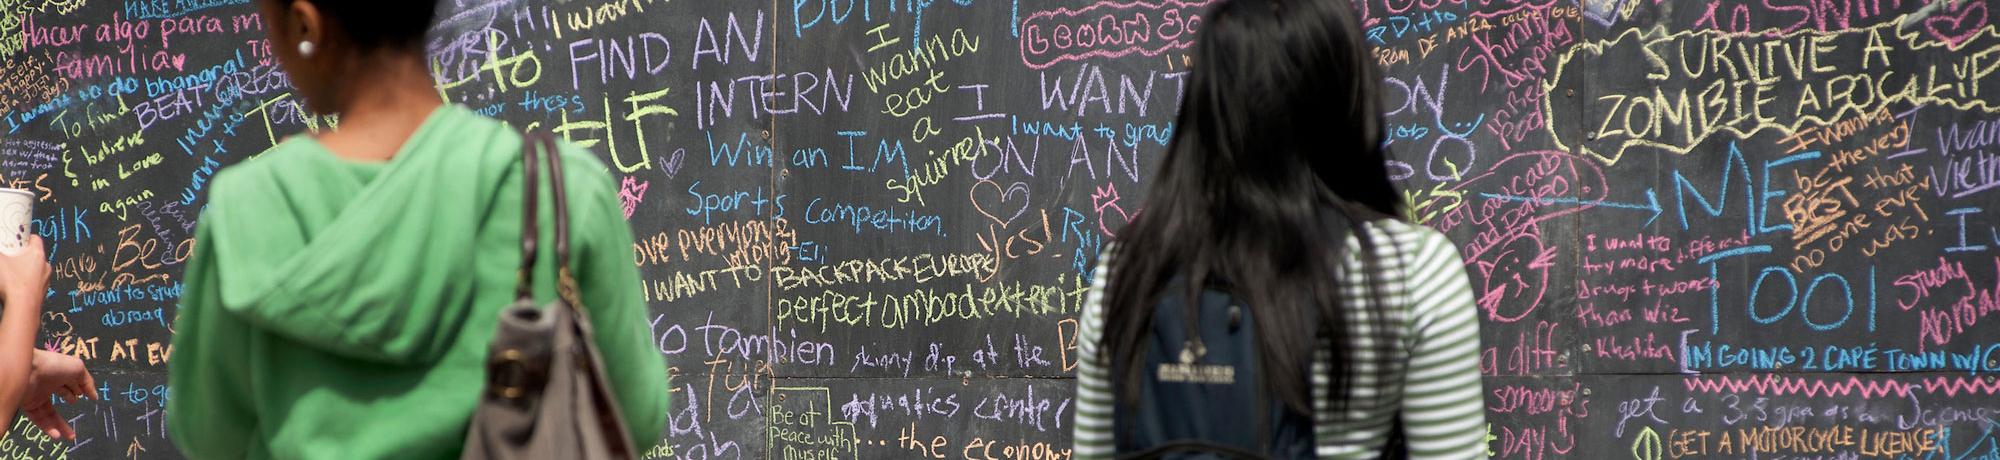 Students write things they would like to do before they graduate on a publicly mounted chalkboard